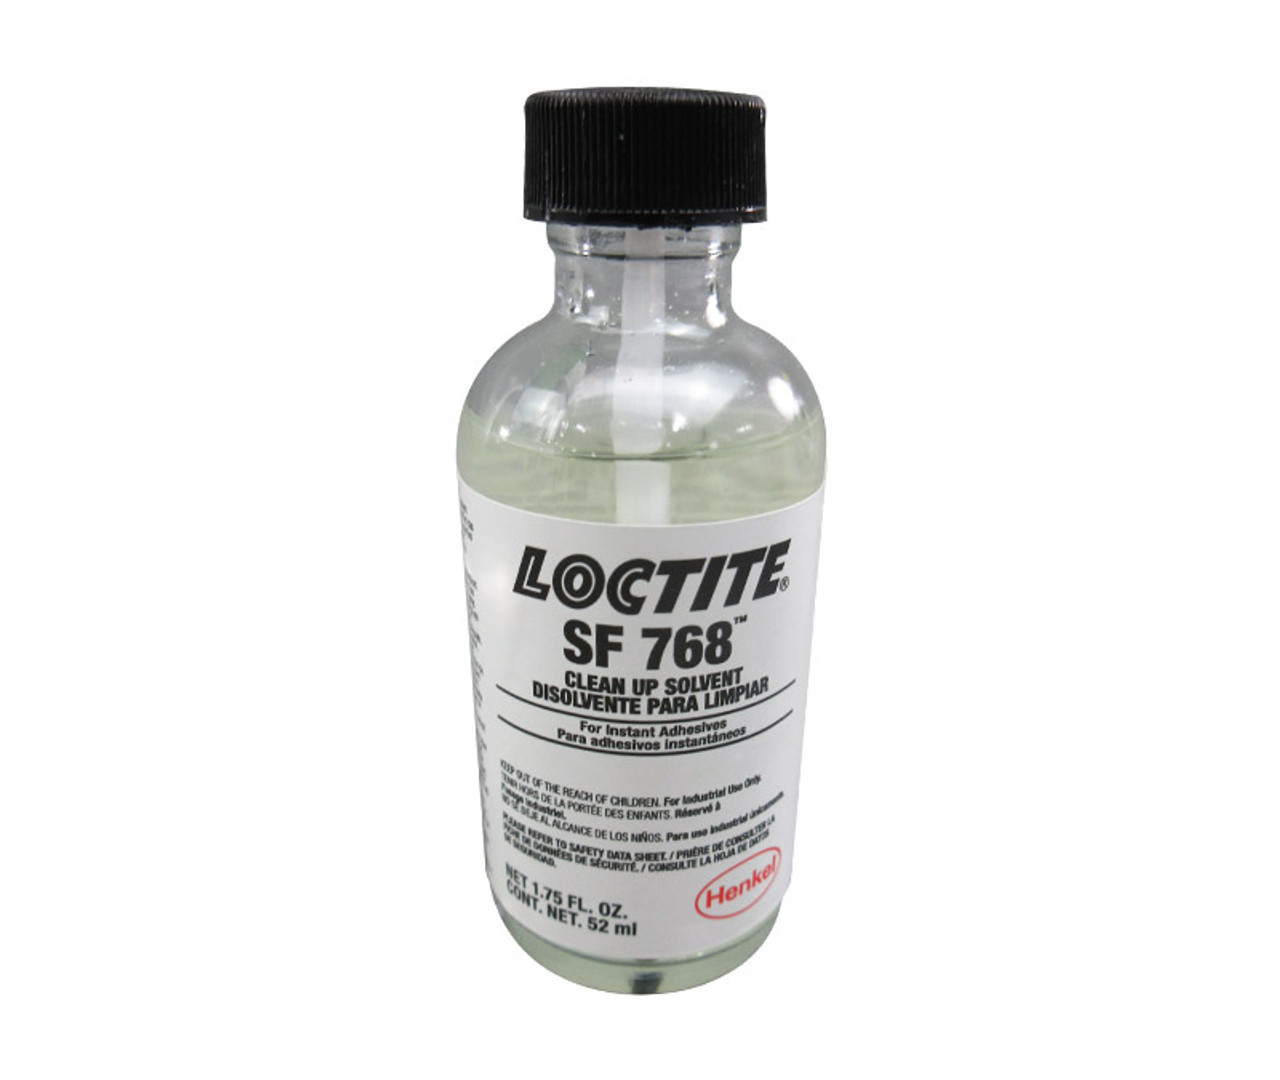 Secondary backing adhesive: The LOCTITE one sprays a web like adhesive and  not aerosol, usually aerosol adhesives will make the room or area toxic  very quickly because it sprays a mist, it